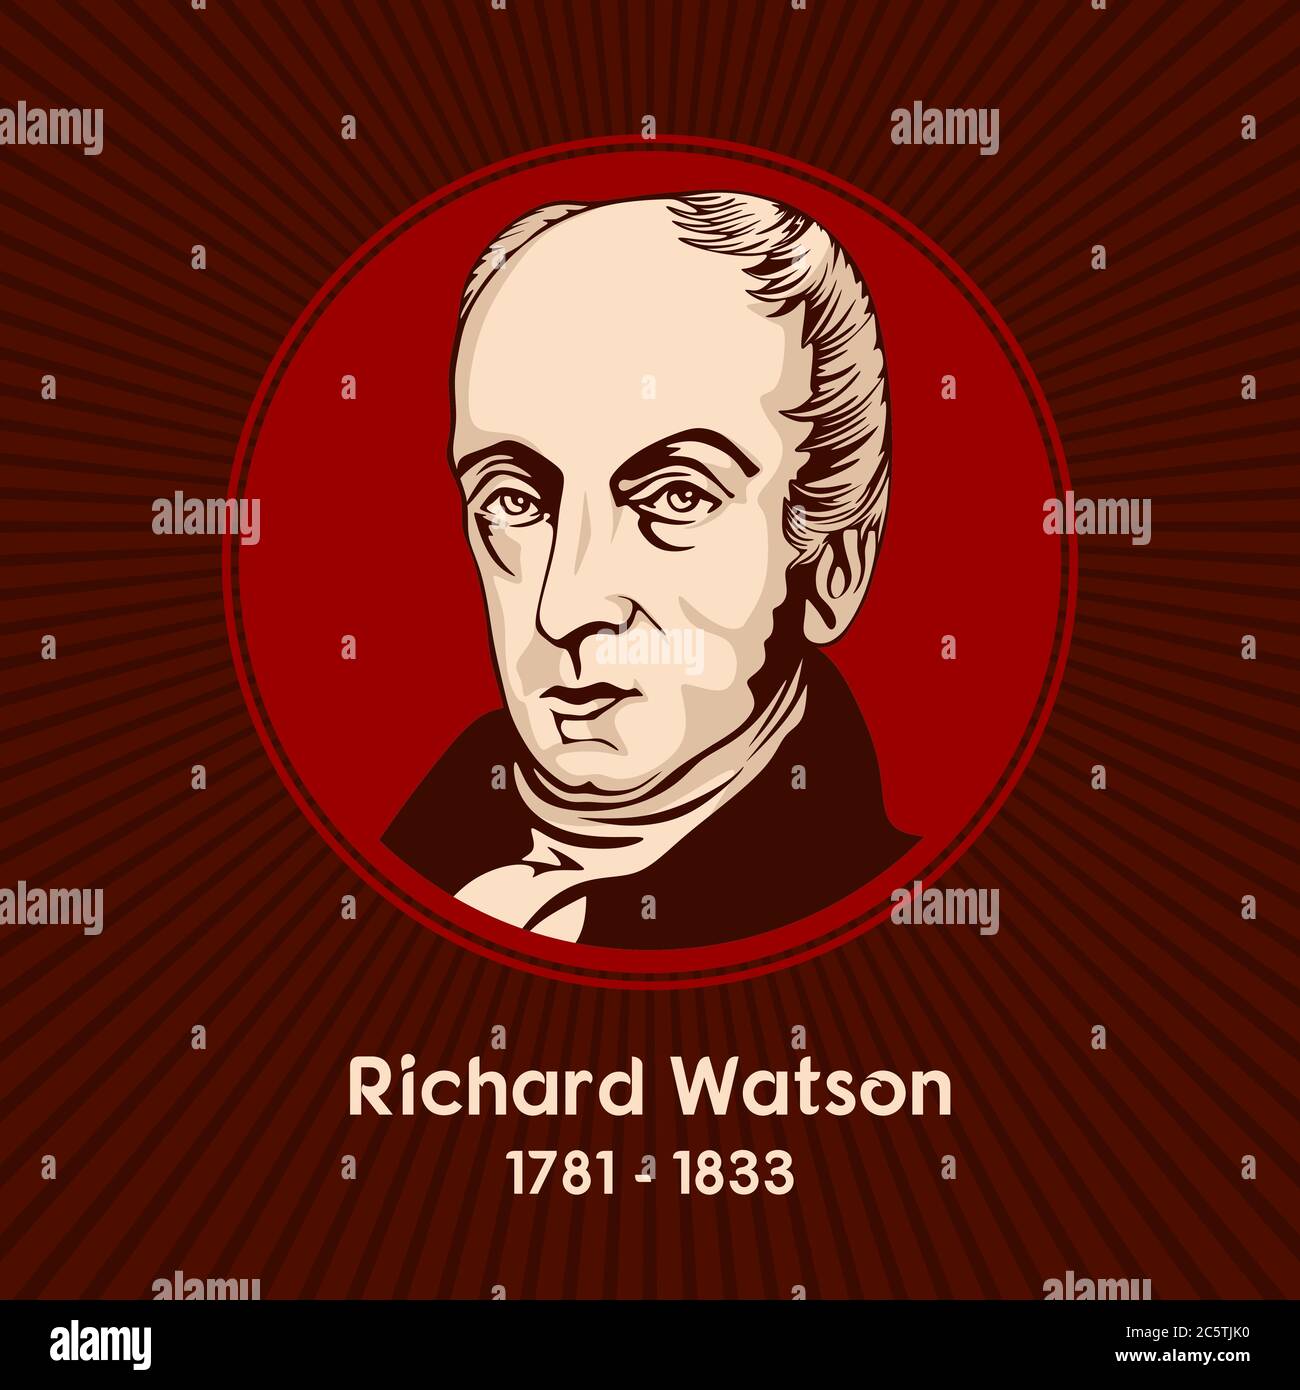 Richard Watson (1781 - 1833) was a British Methodist theologian who was one of the most important figures in 19th century Methodism. Stock Vector